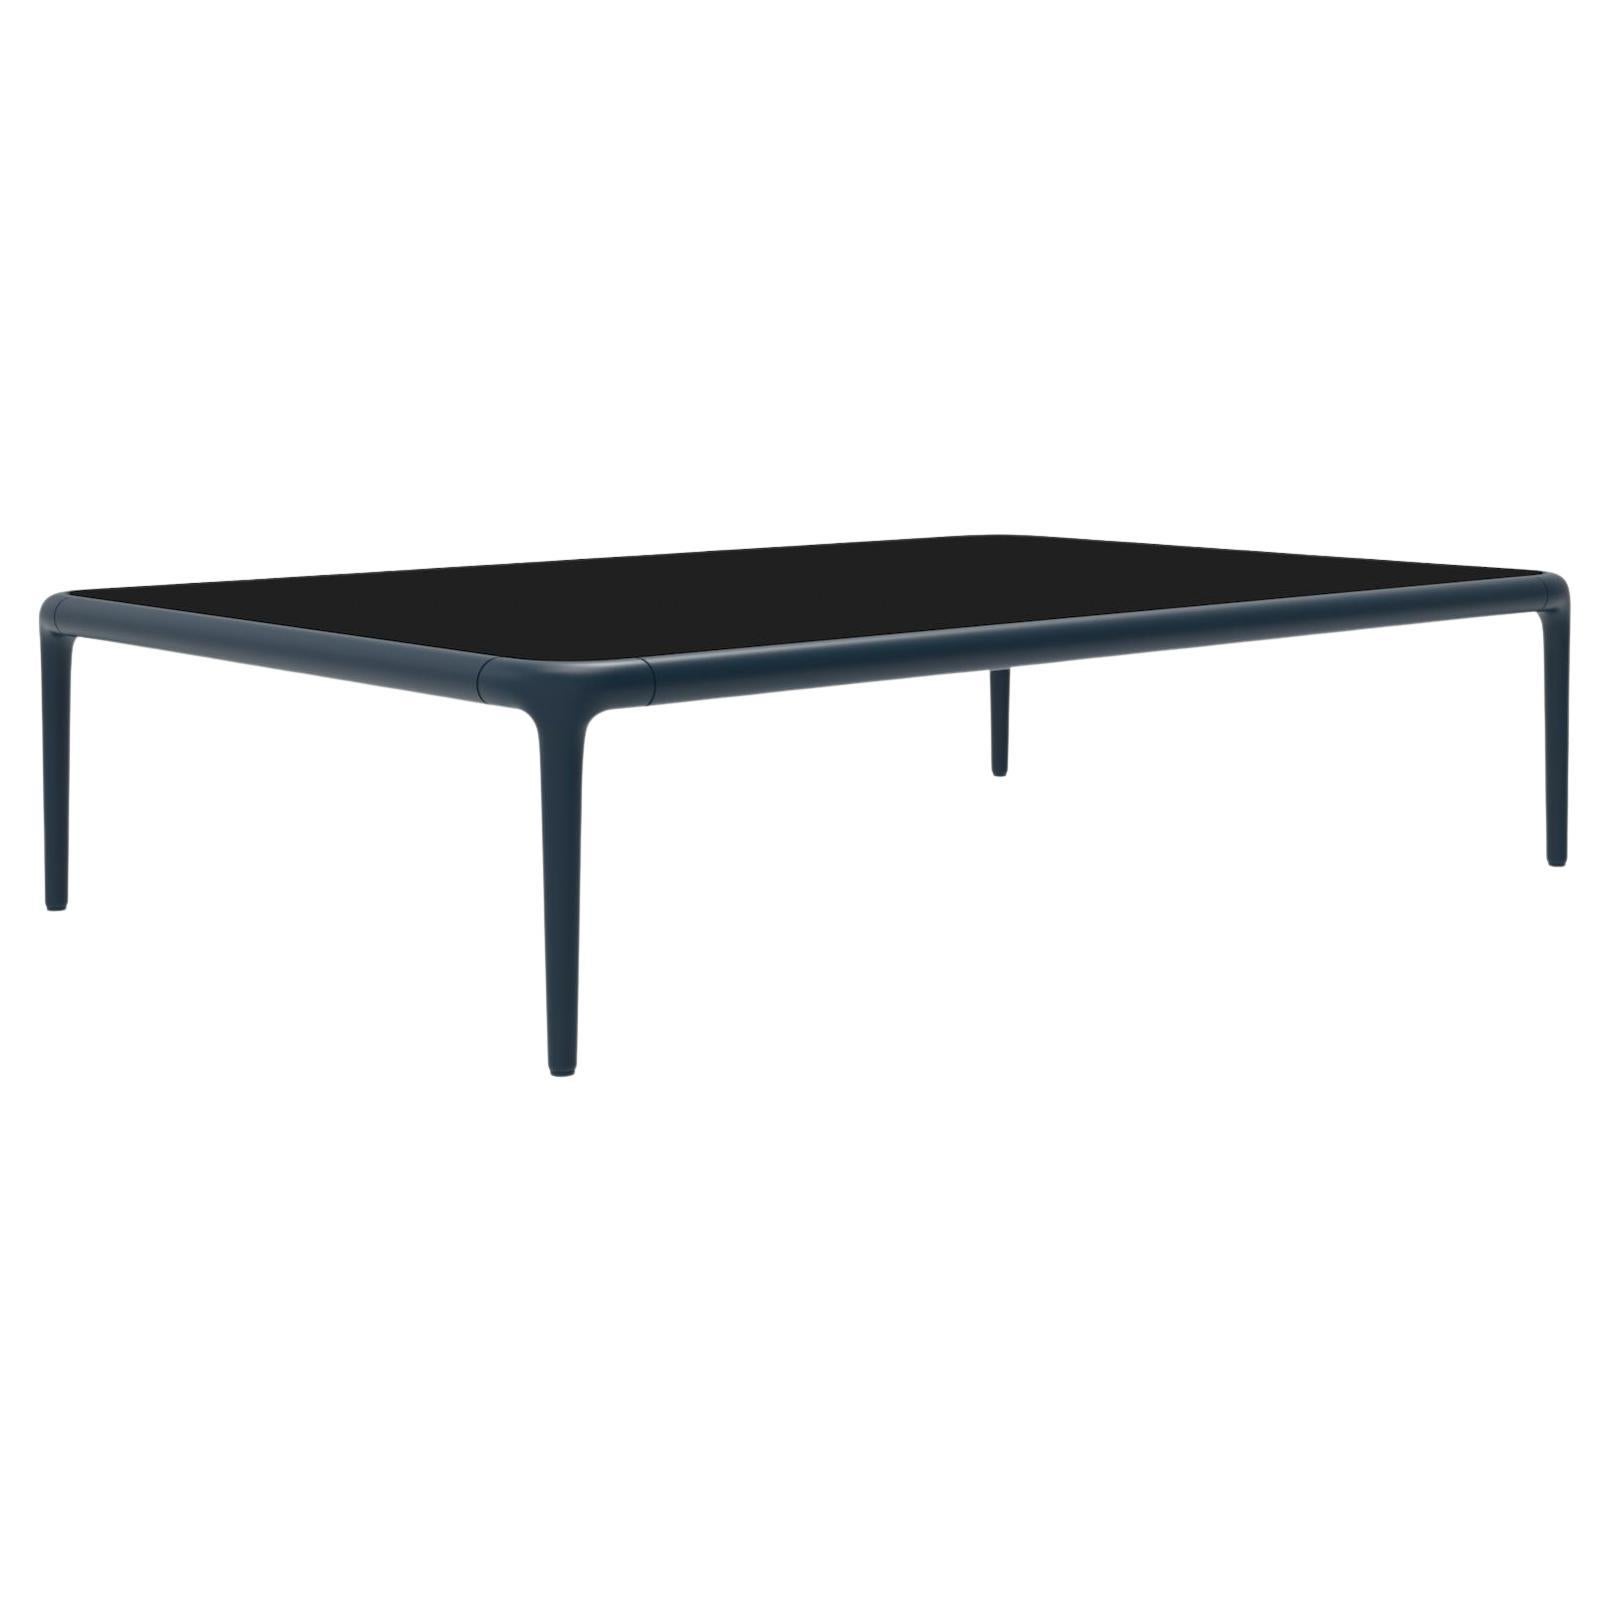 Xaloc Navy Coffee Table 120 with Glass Top by Mowee